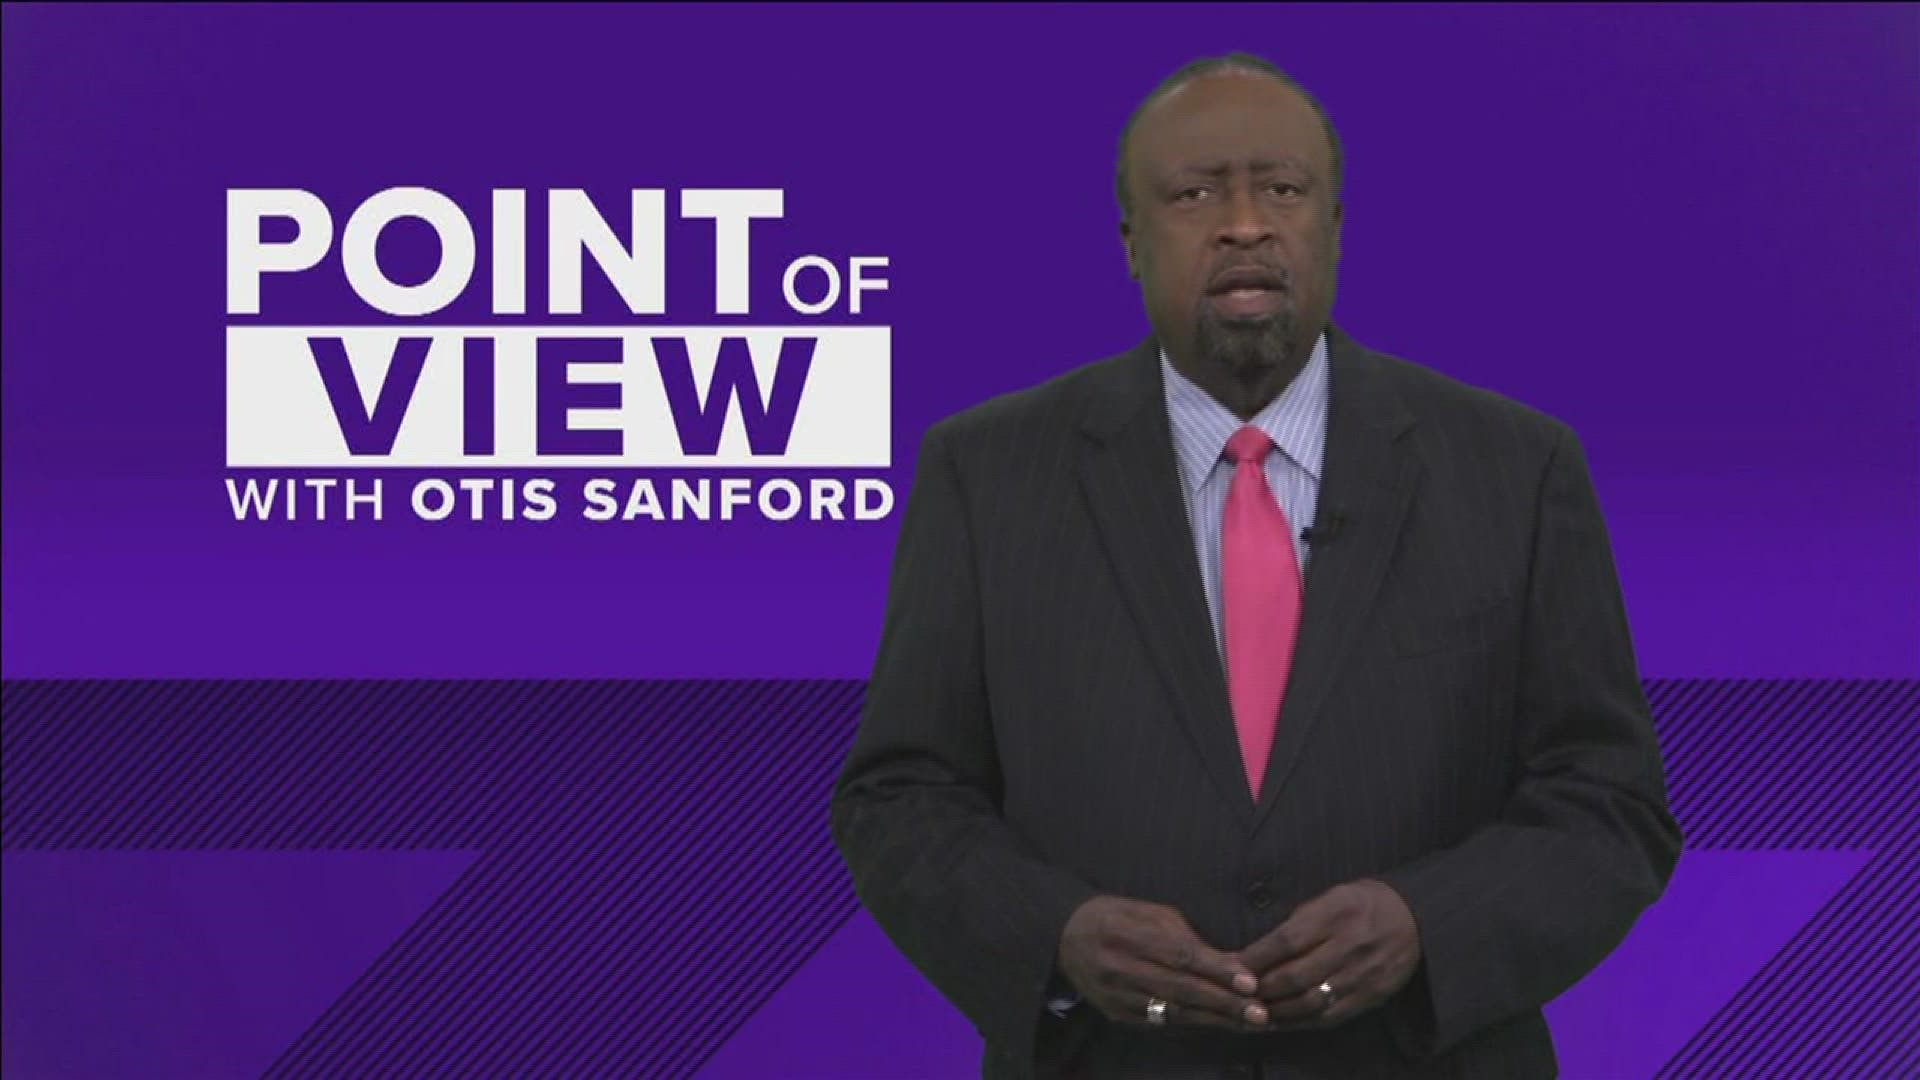 Otis Sanford gives his point of view on the latest developments surrounding Memphis' tallest building.